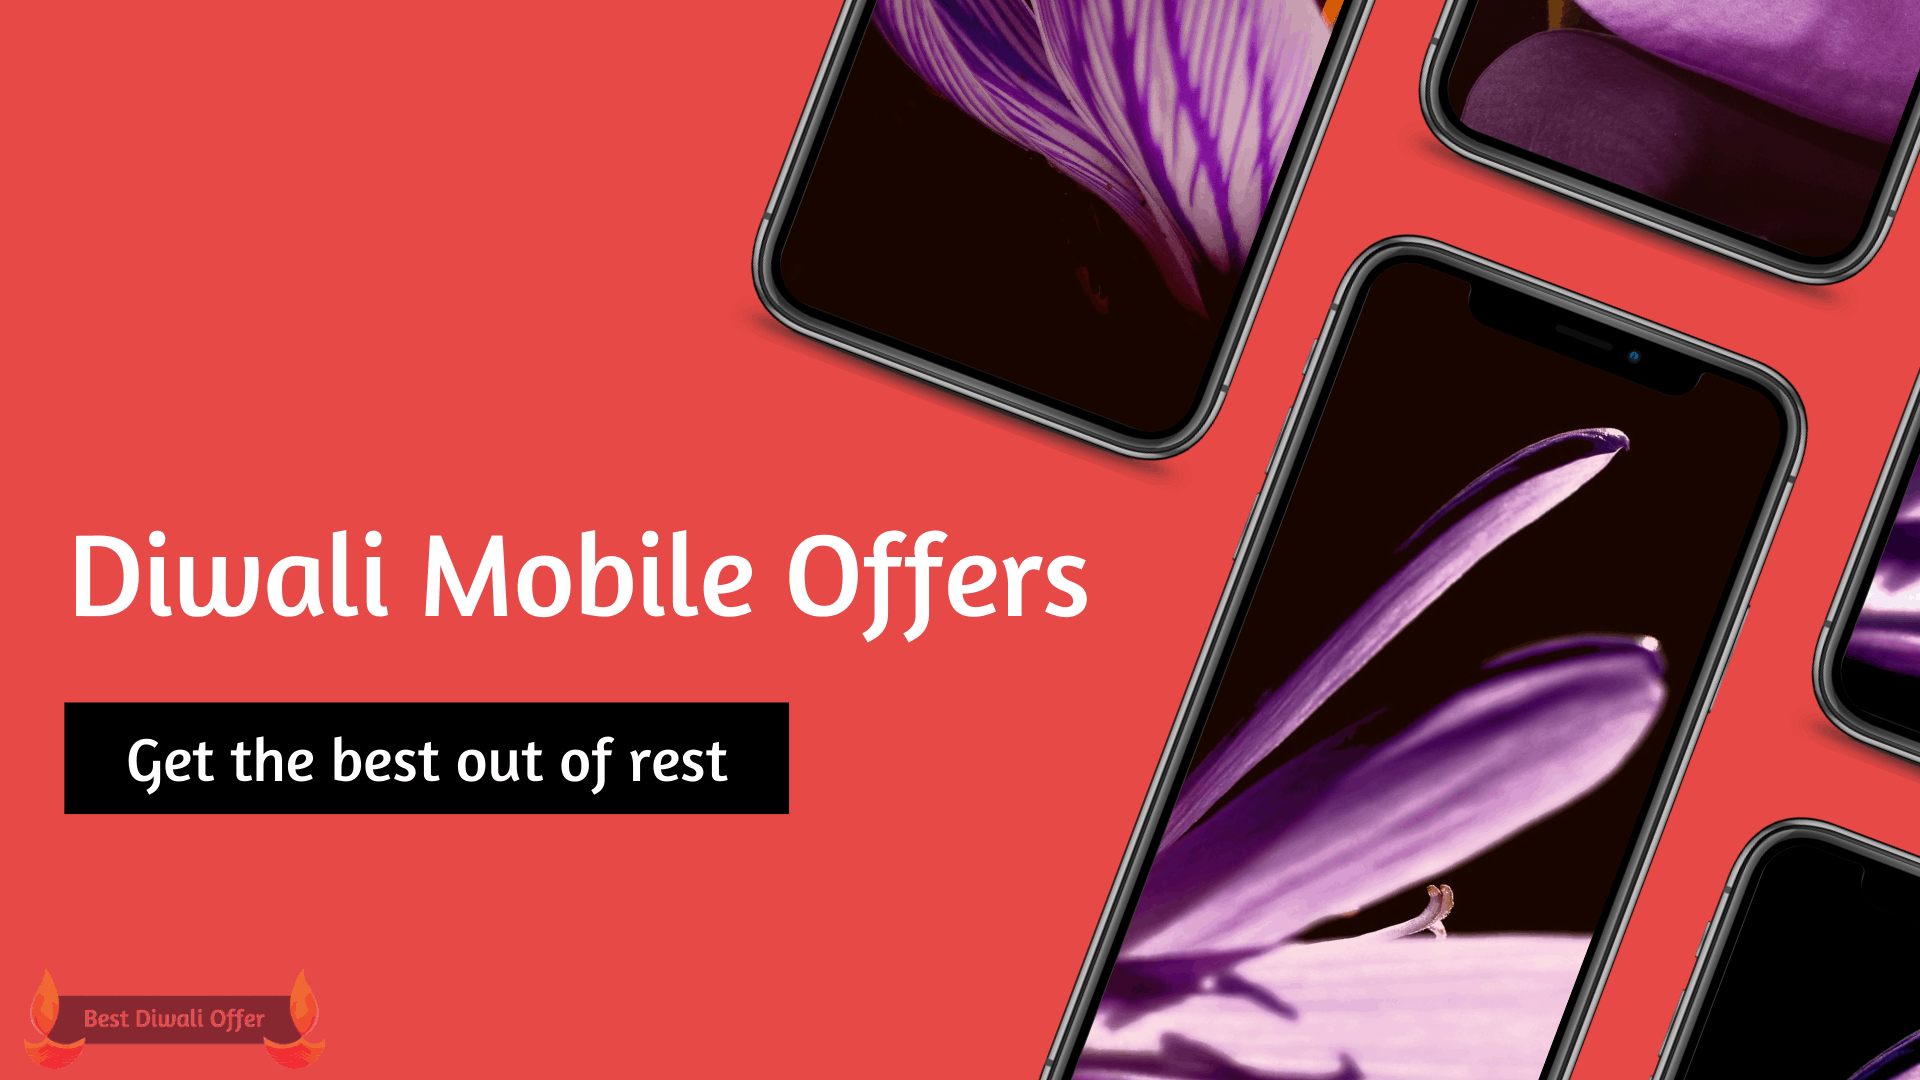 Diwali Mobile Offers